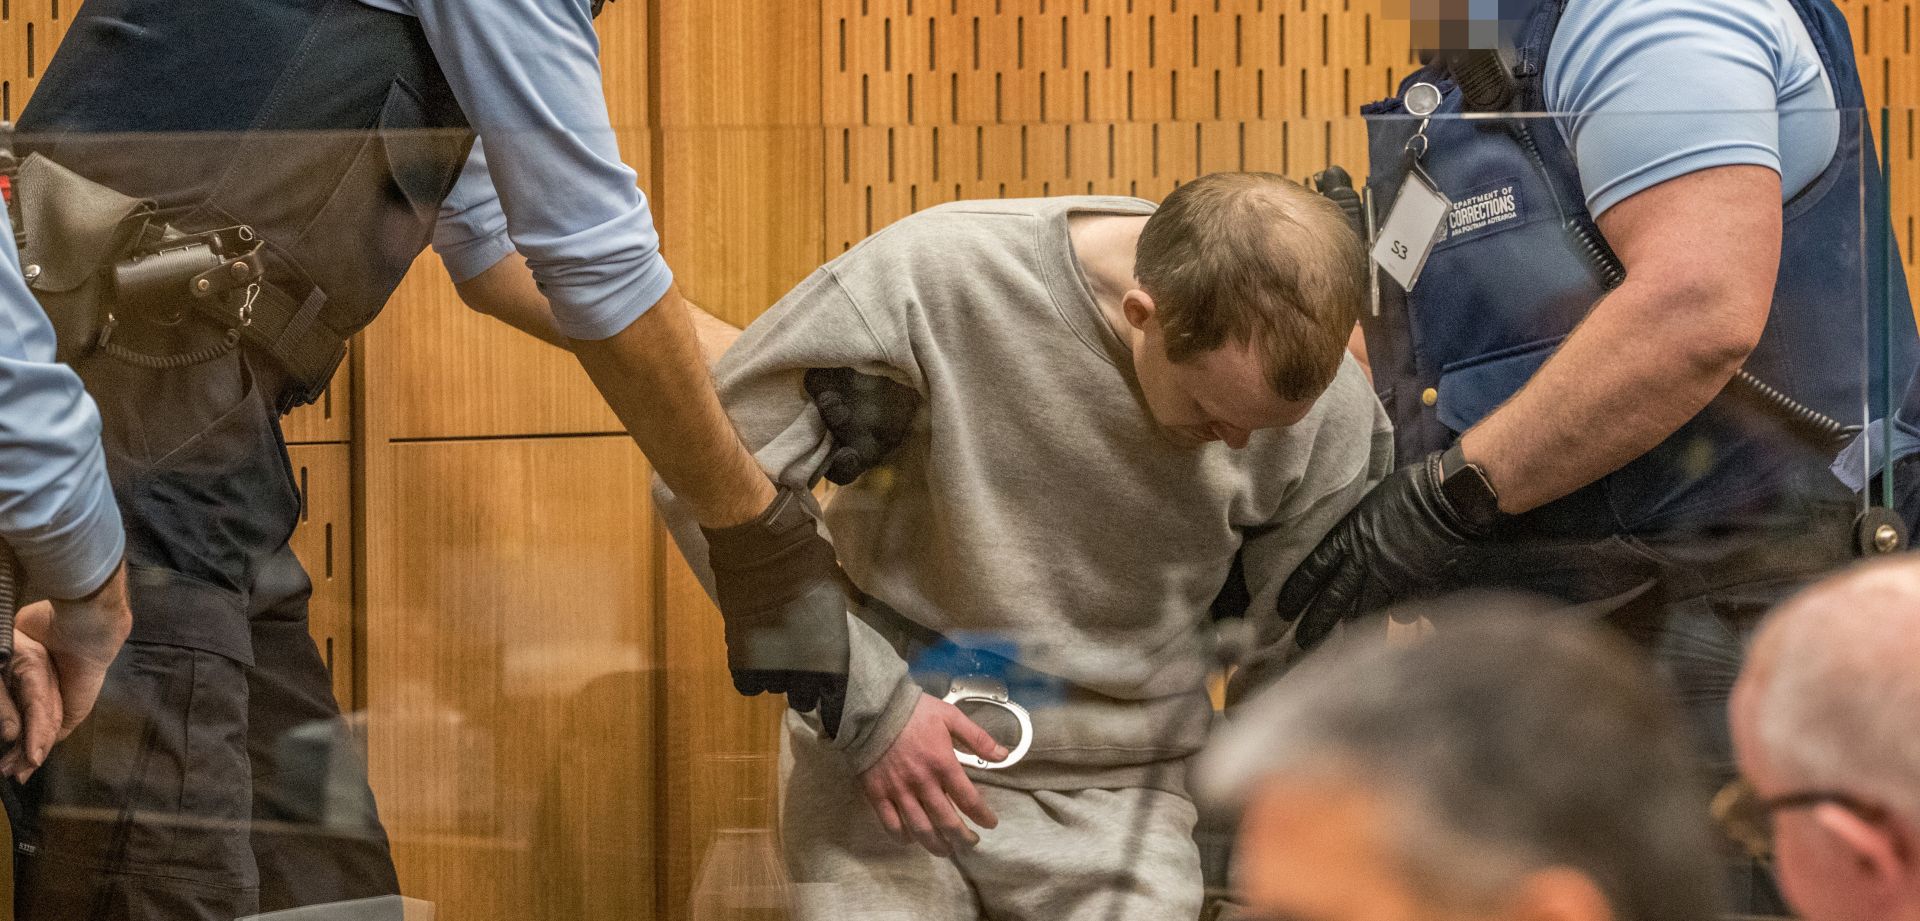 epa08626151 Guards handle Brenton Tarrant (C) during day three sentencing at the High Court in Christchurch, New Zealand, 26 August 2020. Australian white supremacist Brenton Tarrant will be sentenced for terrorism, 51 murders and 40 attempted murders, for his attack on two mosques in Christchurch in 2019.  EPA/JOHN KIRK-ANDERSON / POOL AUSTRALIA AND NEW ZEALAND OUT  
IMAGE PIXELATED AT SOURCE